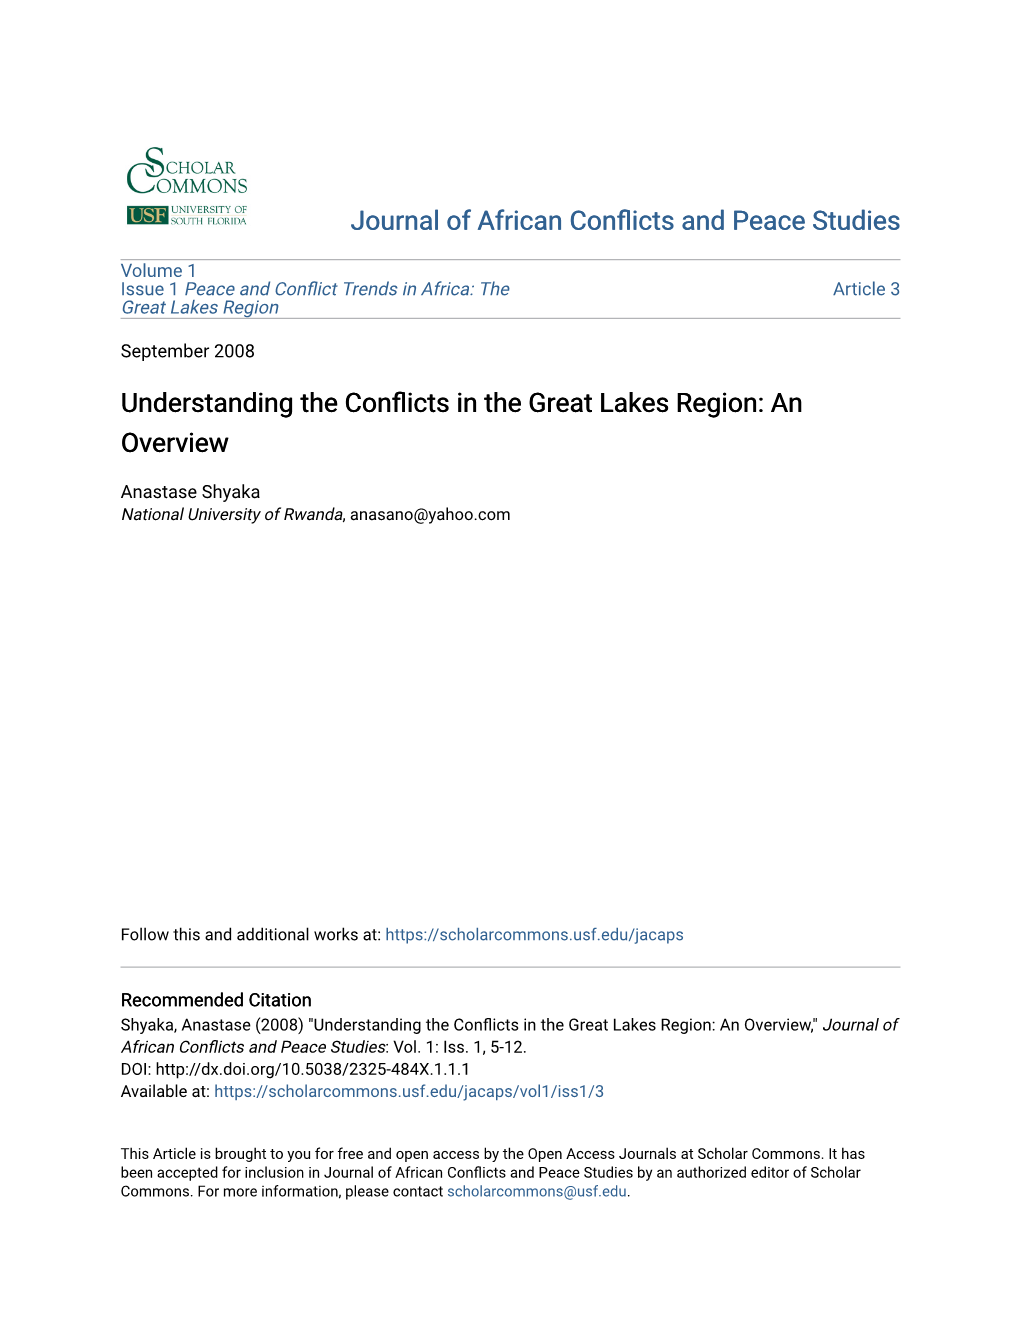 Understanding the Conflicts in the Great Lakes Region: an Overview